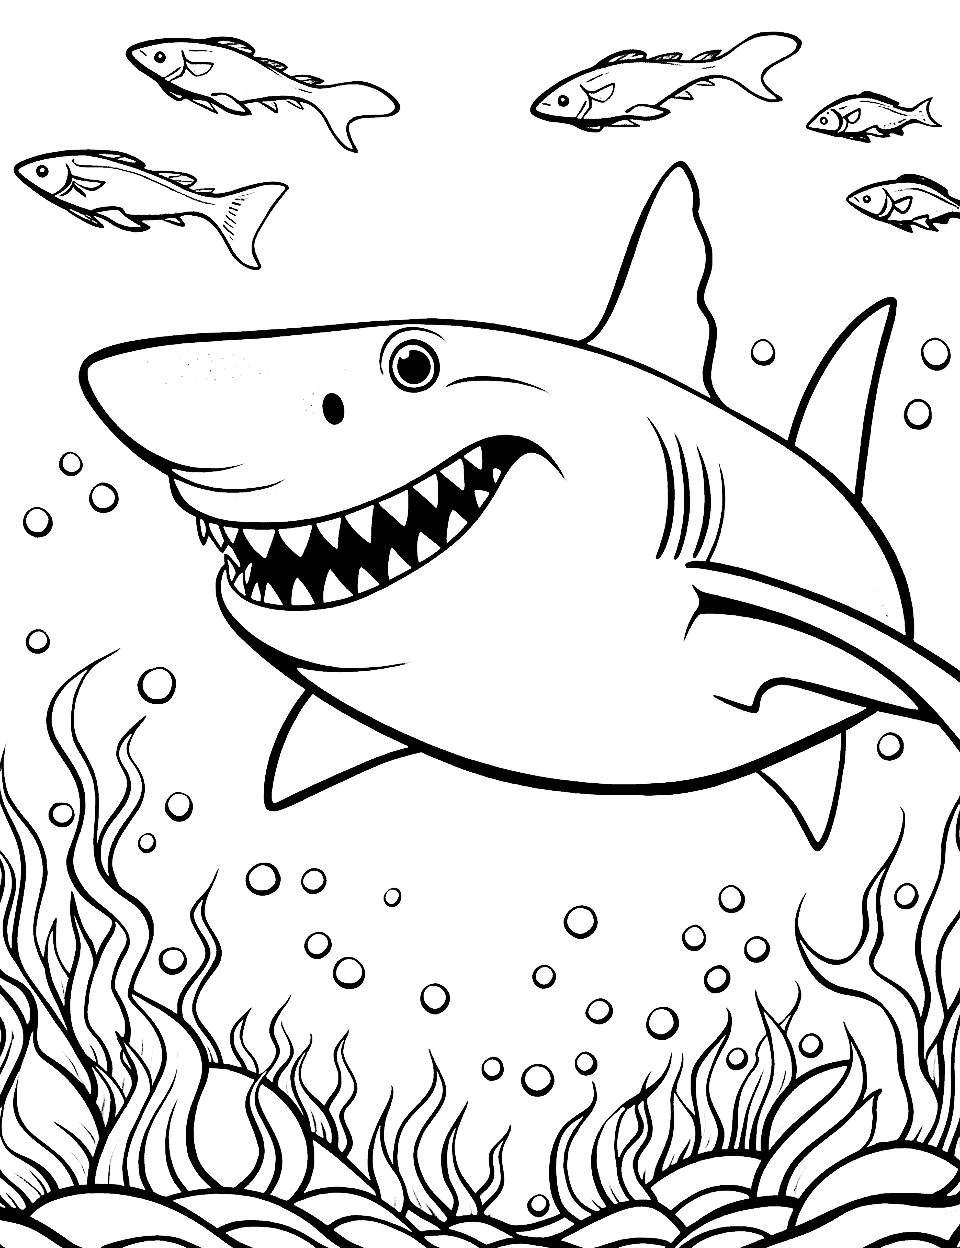 Shark Encounter Coloring Page - A big shark, with a few tiny fish around, showcasing the predator and the prey.